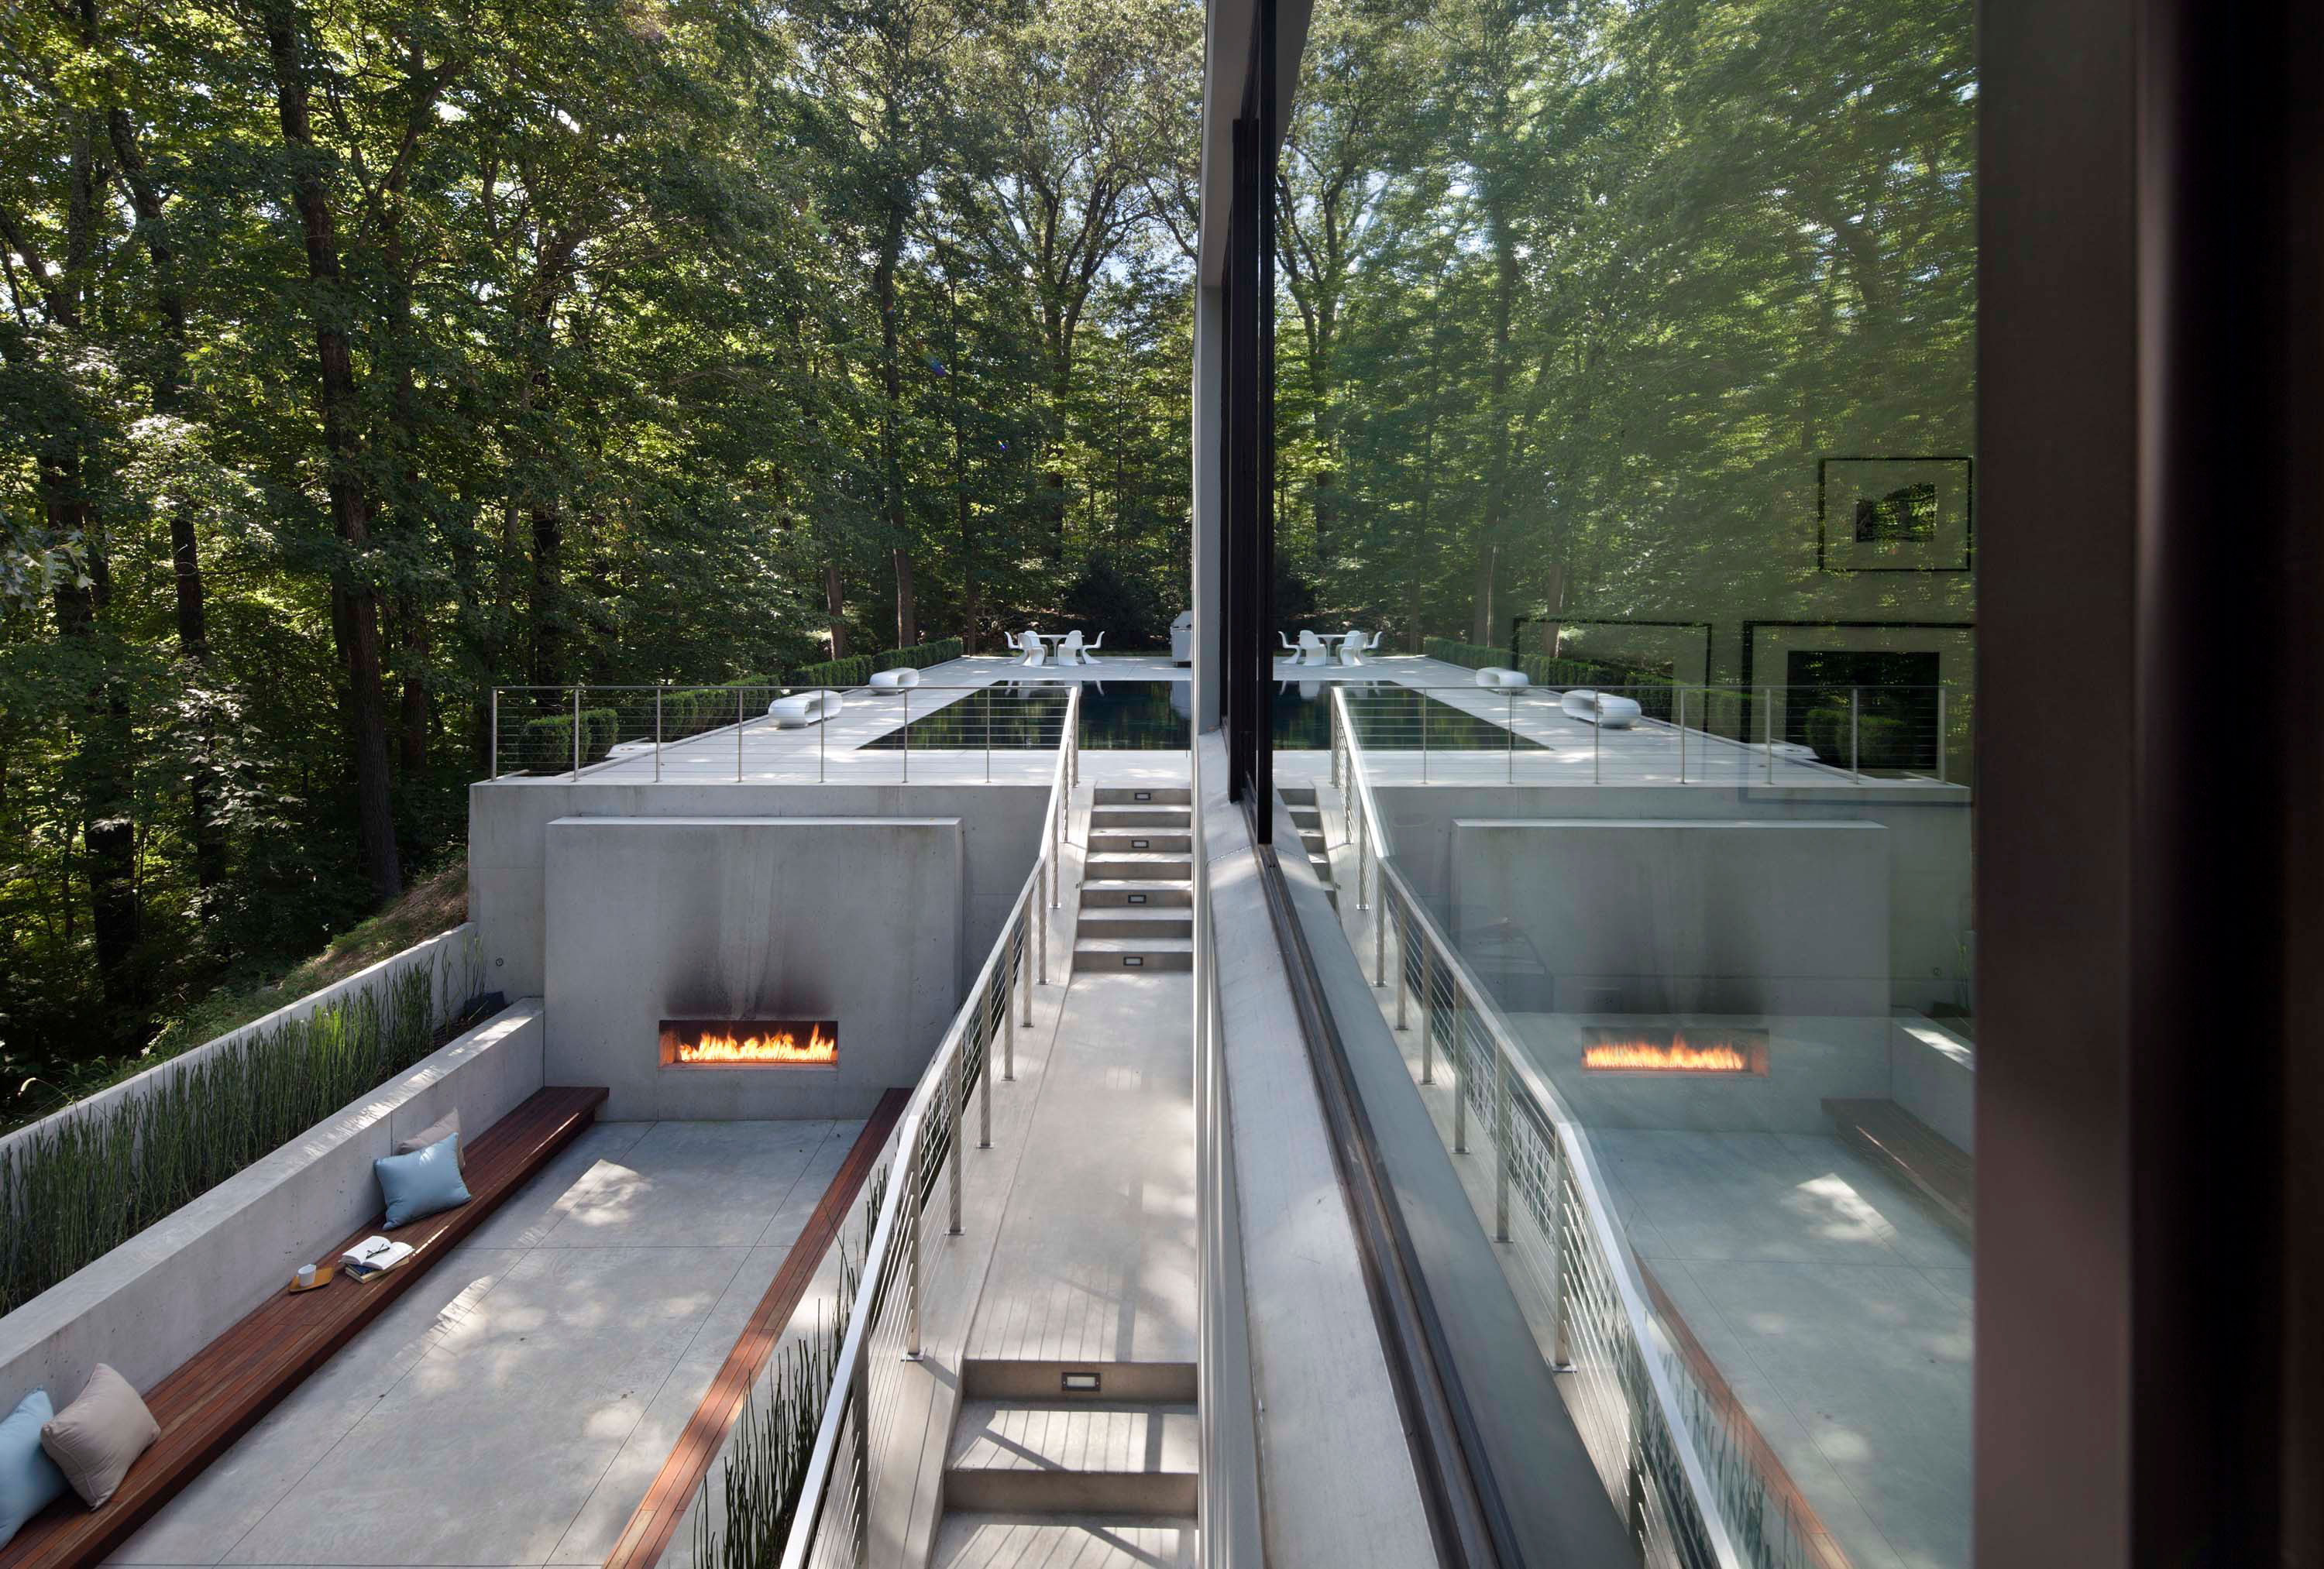 Exterior photo of the New Canaan Residence by Specht Novak Architects. Shot from upper level by Elizabeth Felicella, featuring a fireplace and lower level lounge area embraced by the trees and surrounding greenery.